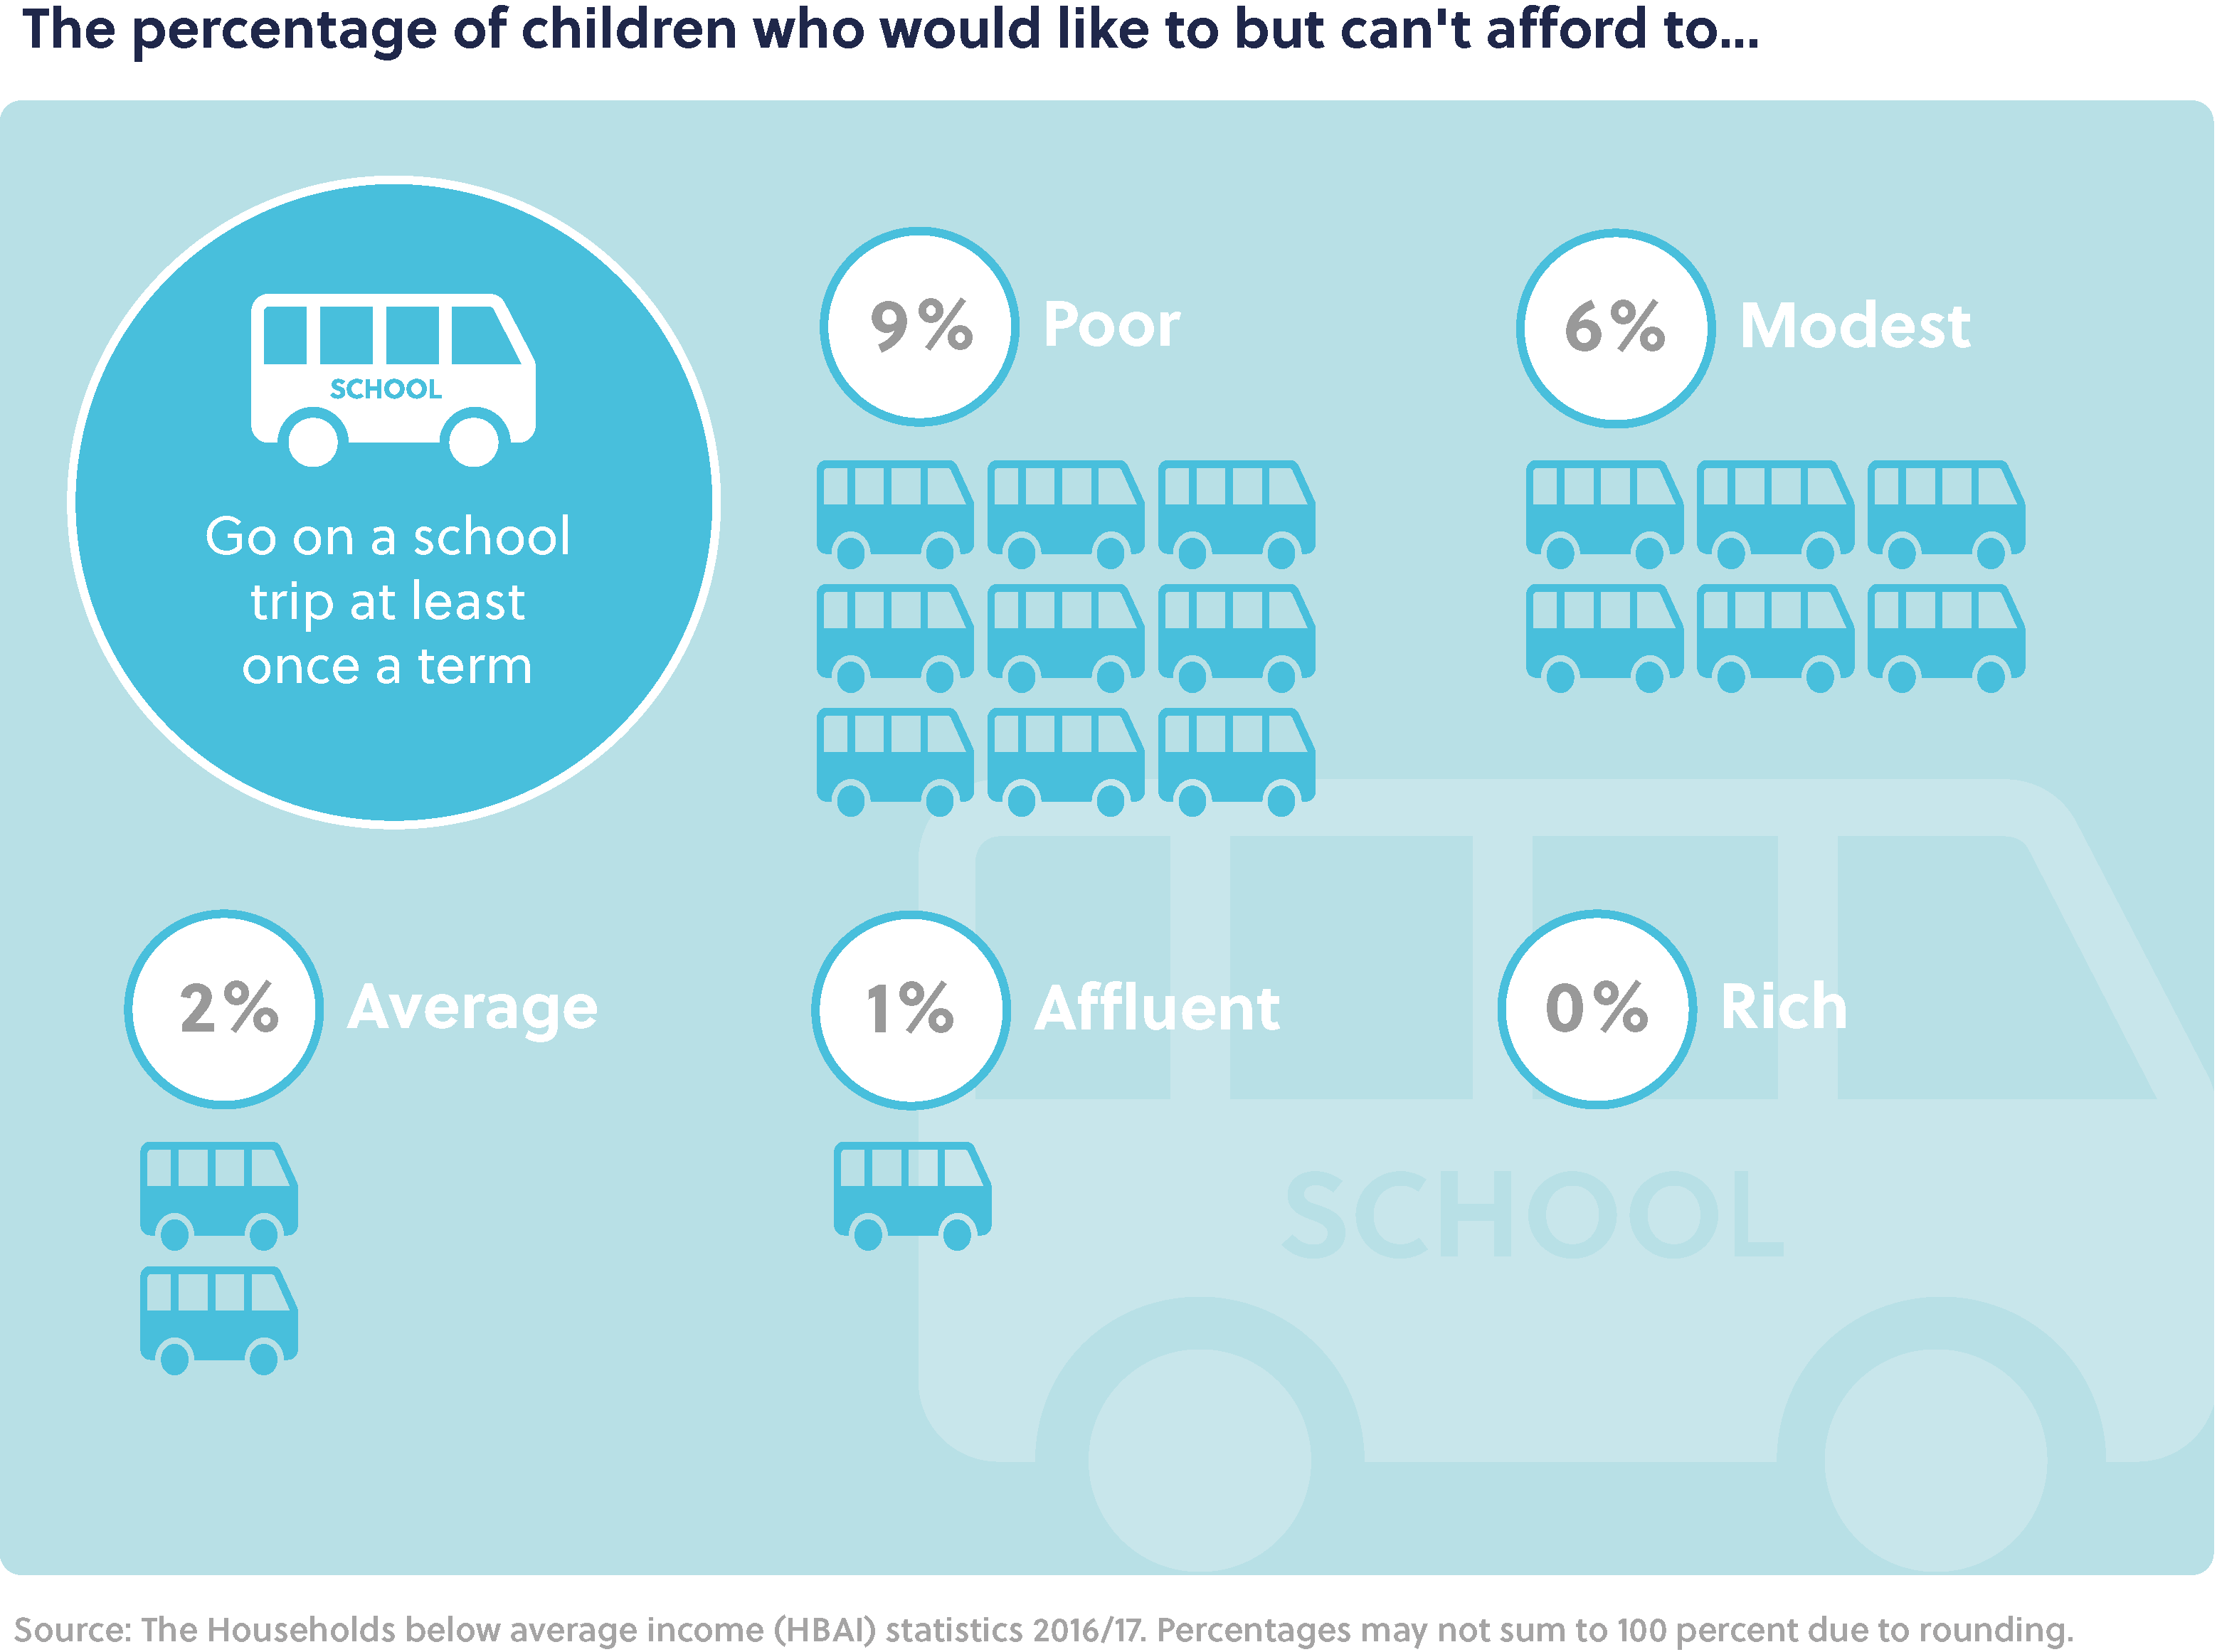 Main title: The percentage of children who would like to but can't afford to... Sub-heading: Go on a school trip at least once a term. Poor: 9%, Modest: 6%, Average: 2%, Affluent: 1%, and Rich: 0%.  Source: The Households below average income (HBAI) statistics 2016/17. Percentages may not sum to 100 percent due to rounding.  